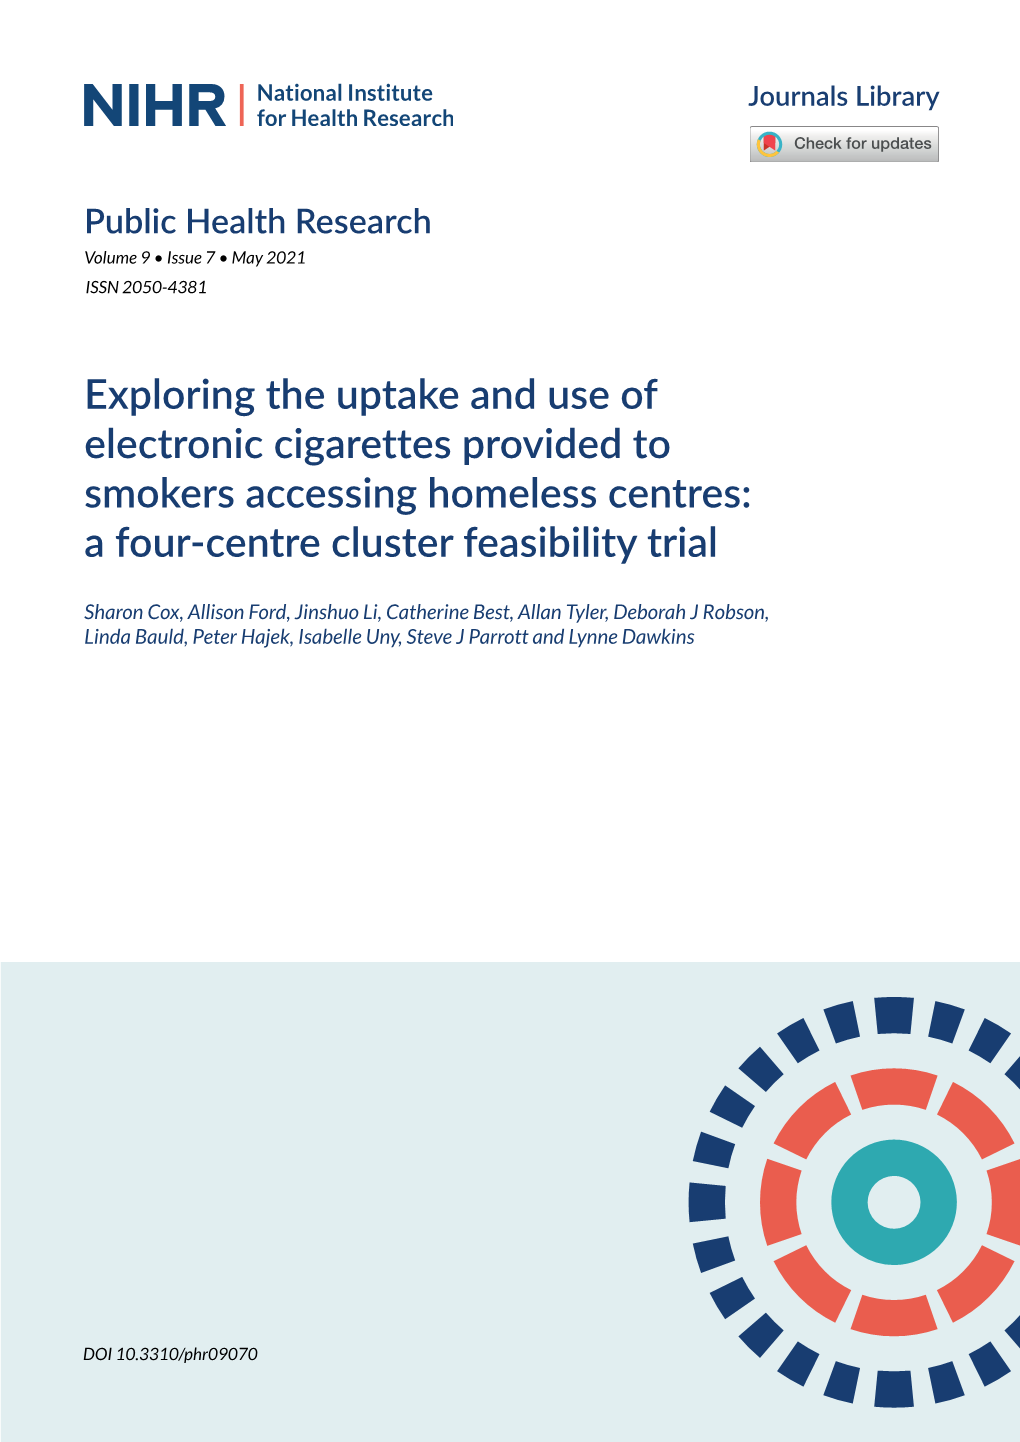 Exploring the Uptake and Use of Electronic Cigarettes Provided to Smokers Accessing Homeless Centres: a Four-Centre Cluster Feasibility Trial